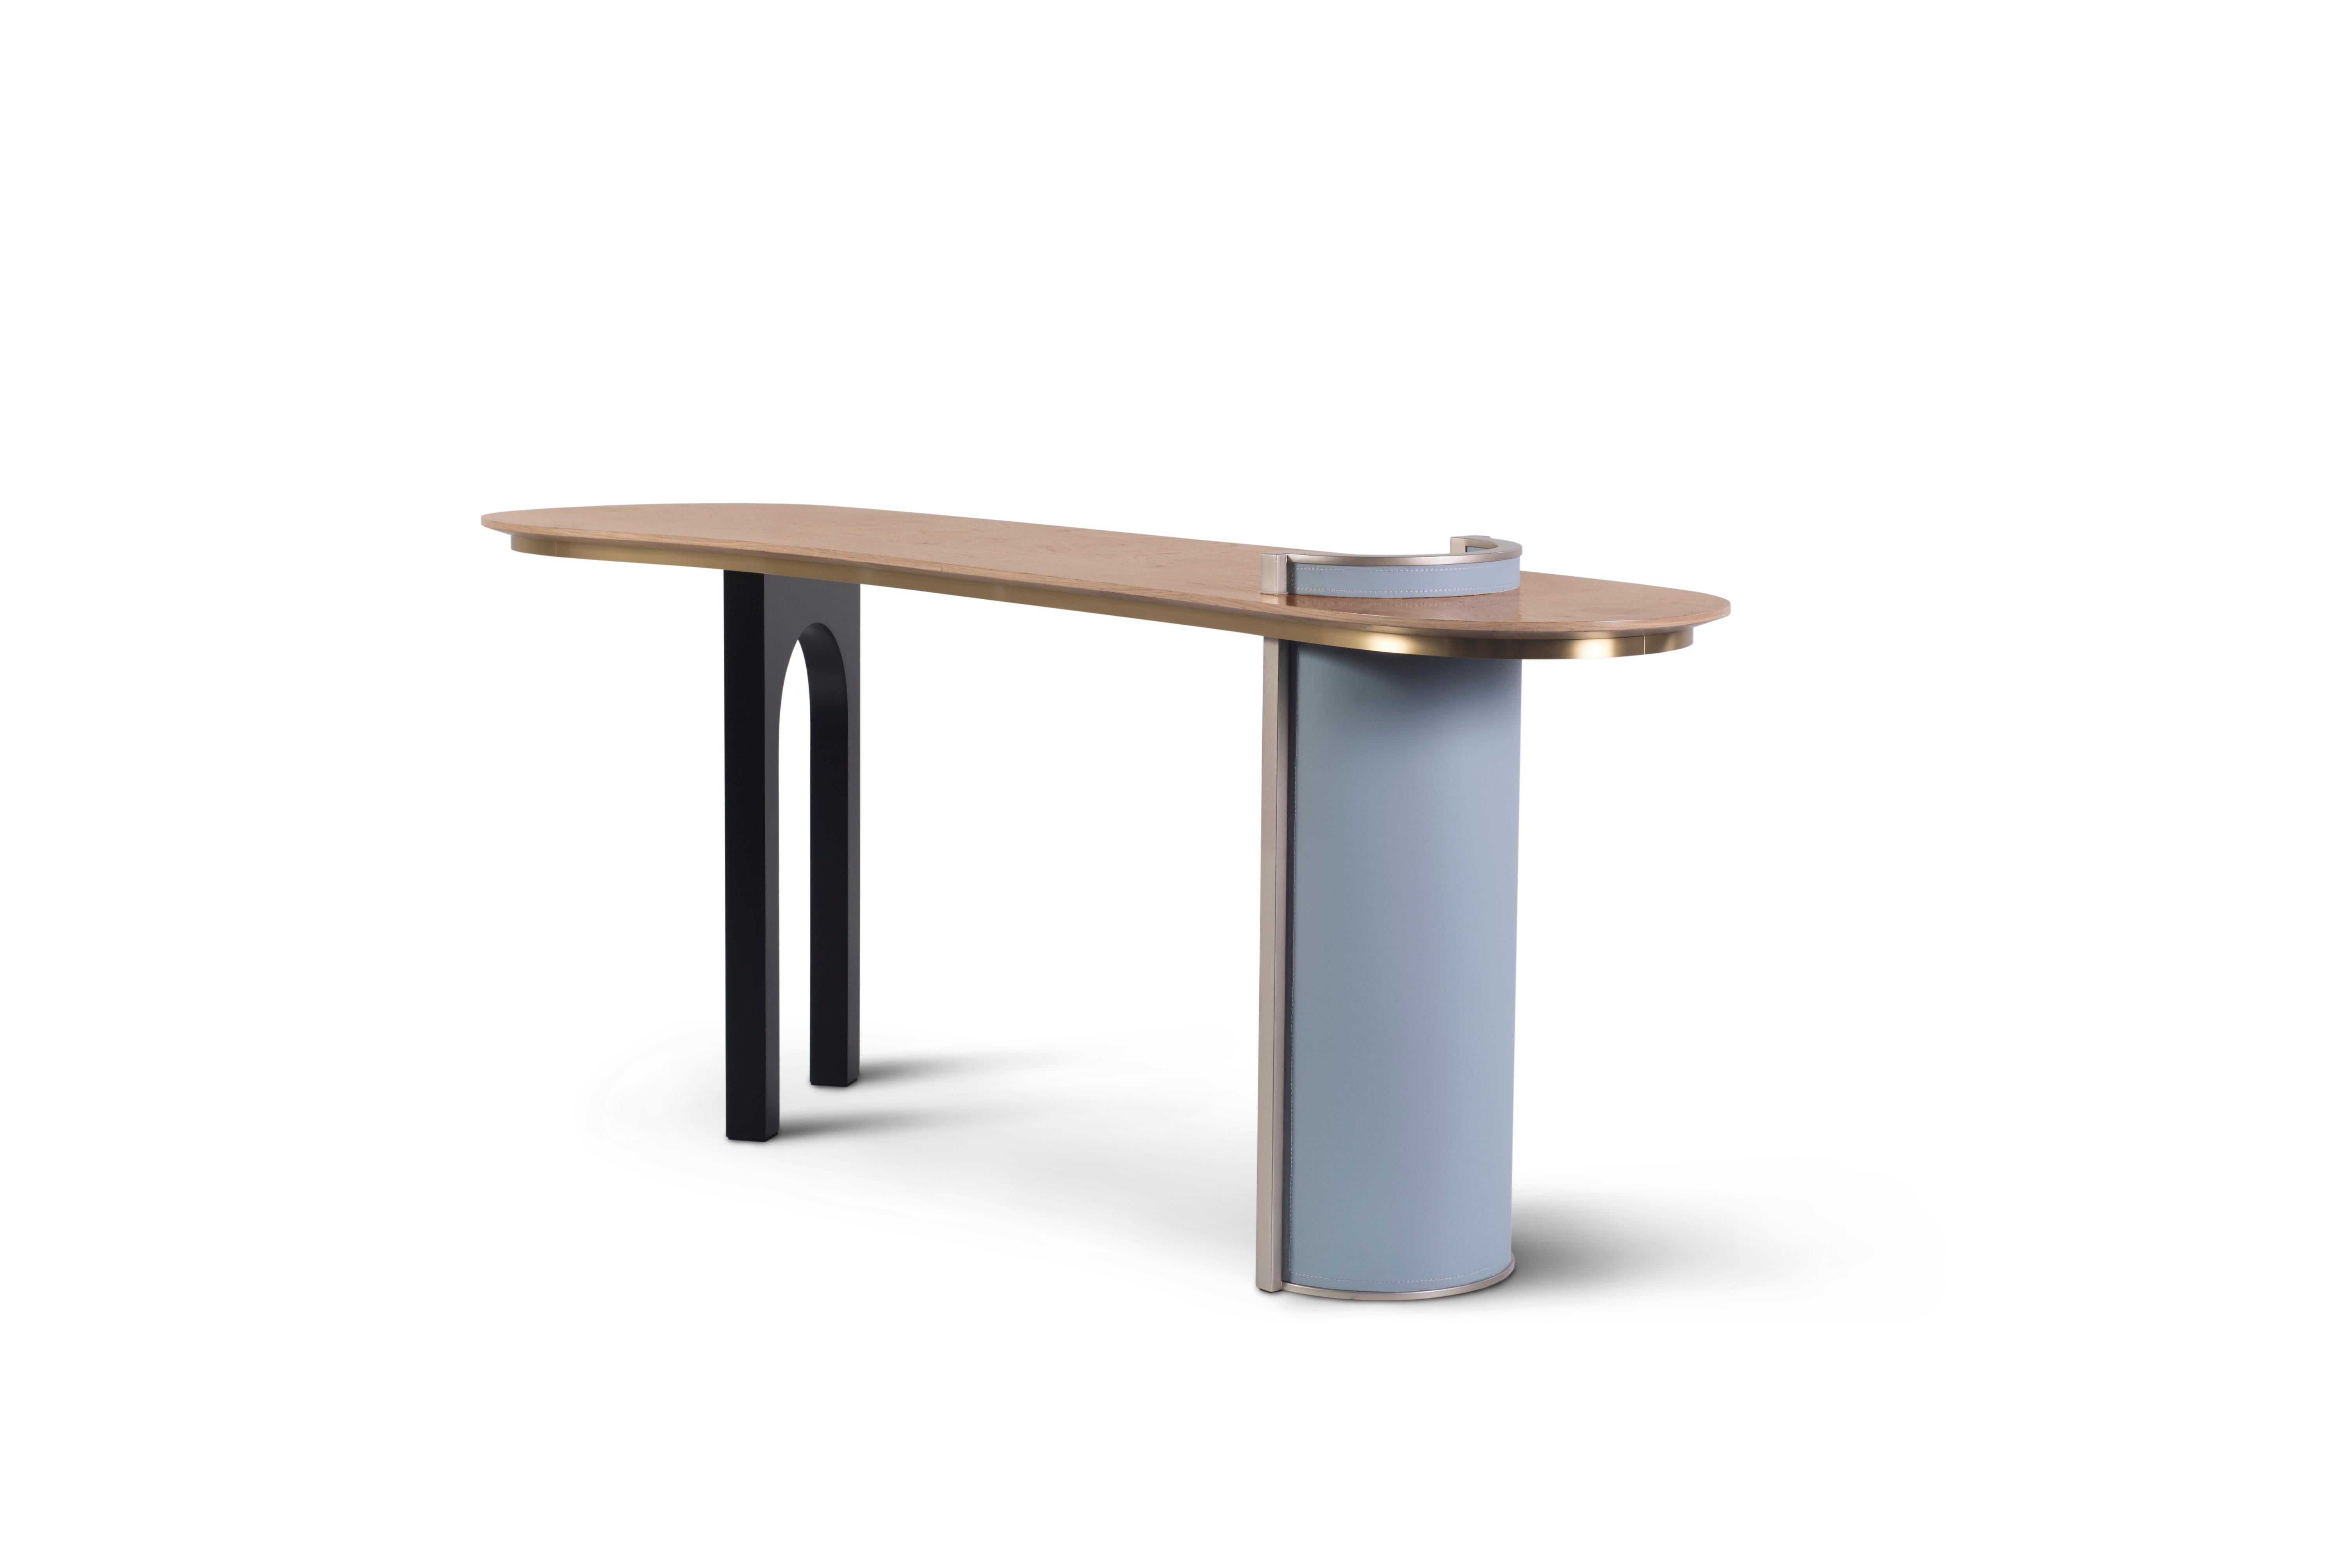 Oak console by Green Apple
Dimensions: H 72 x W 170 x D 49 cm
Materials: Oak root; natural colour; satin finish
Brushed brass; high-gloss finish
Black lacquer; satin finish
Champagne bronze powder; high-gloss finish
Light Blue high standard